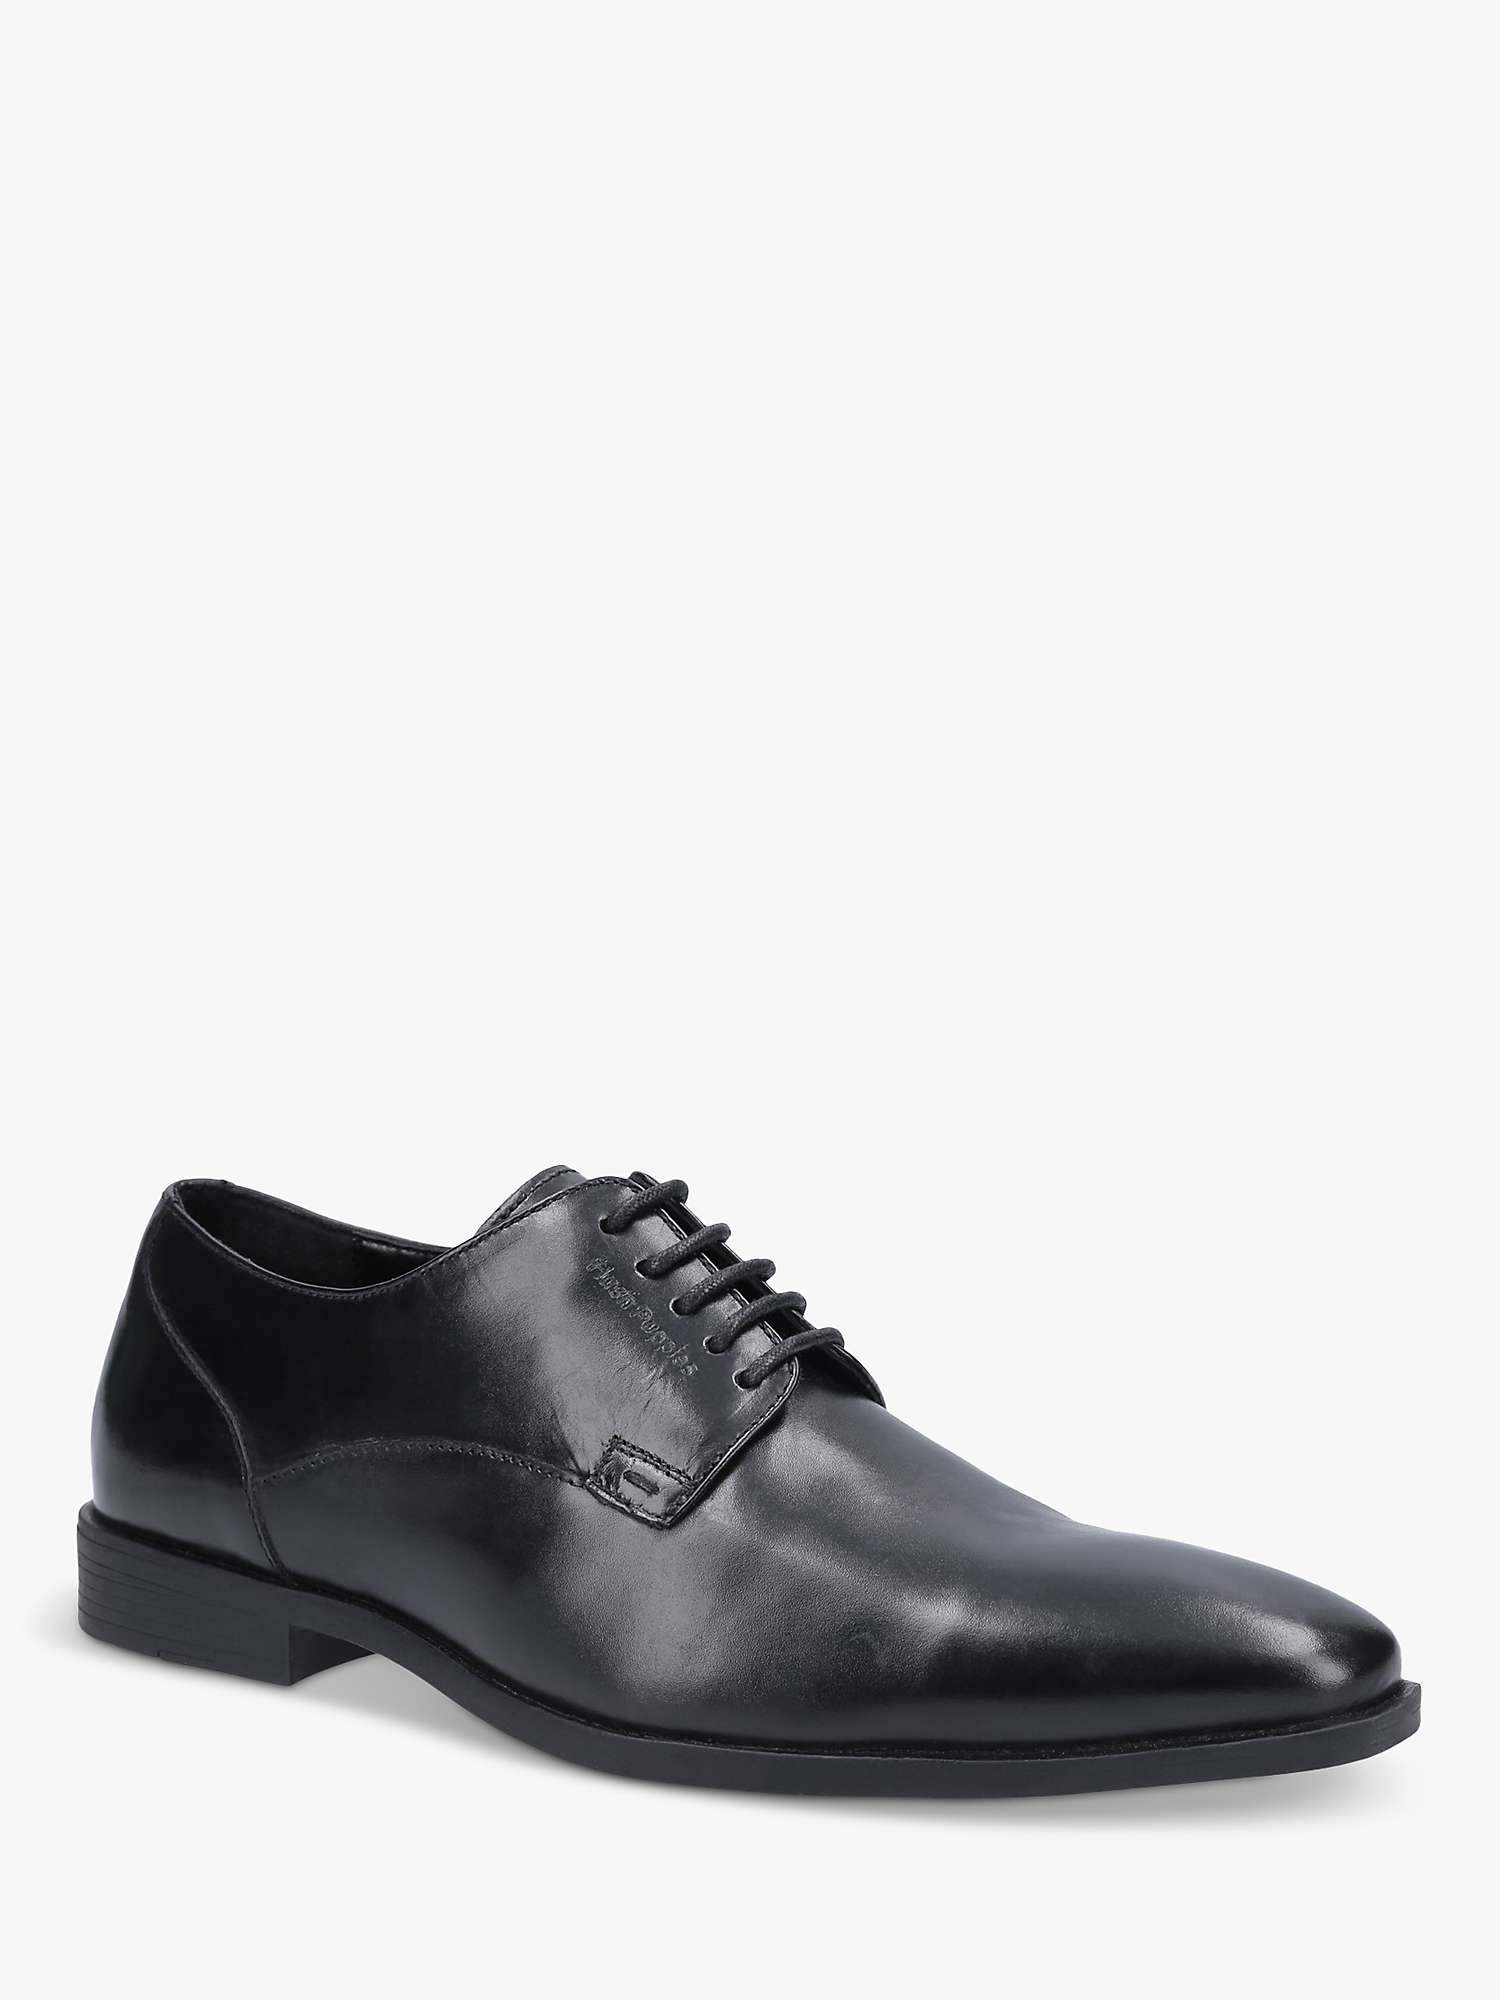 Buy Hush Puppies Ezra Leather Lace Up Shoes, Black Online at johnlewis.com